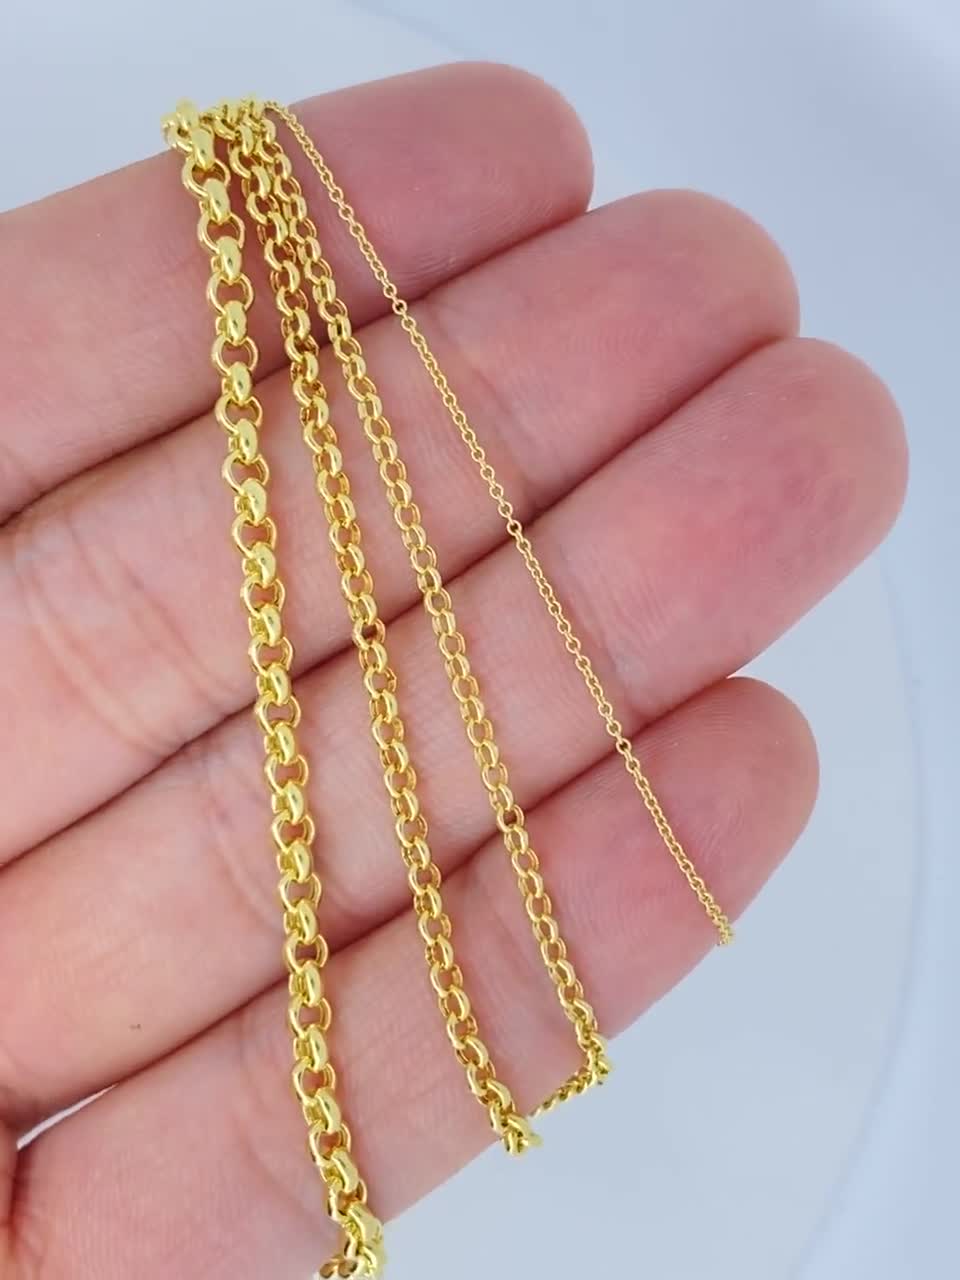 Italian Gold Men's 5.0mm Rope Chain Necklace in 14K Gold - 22